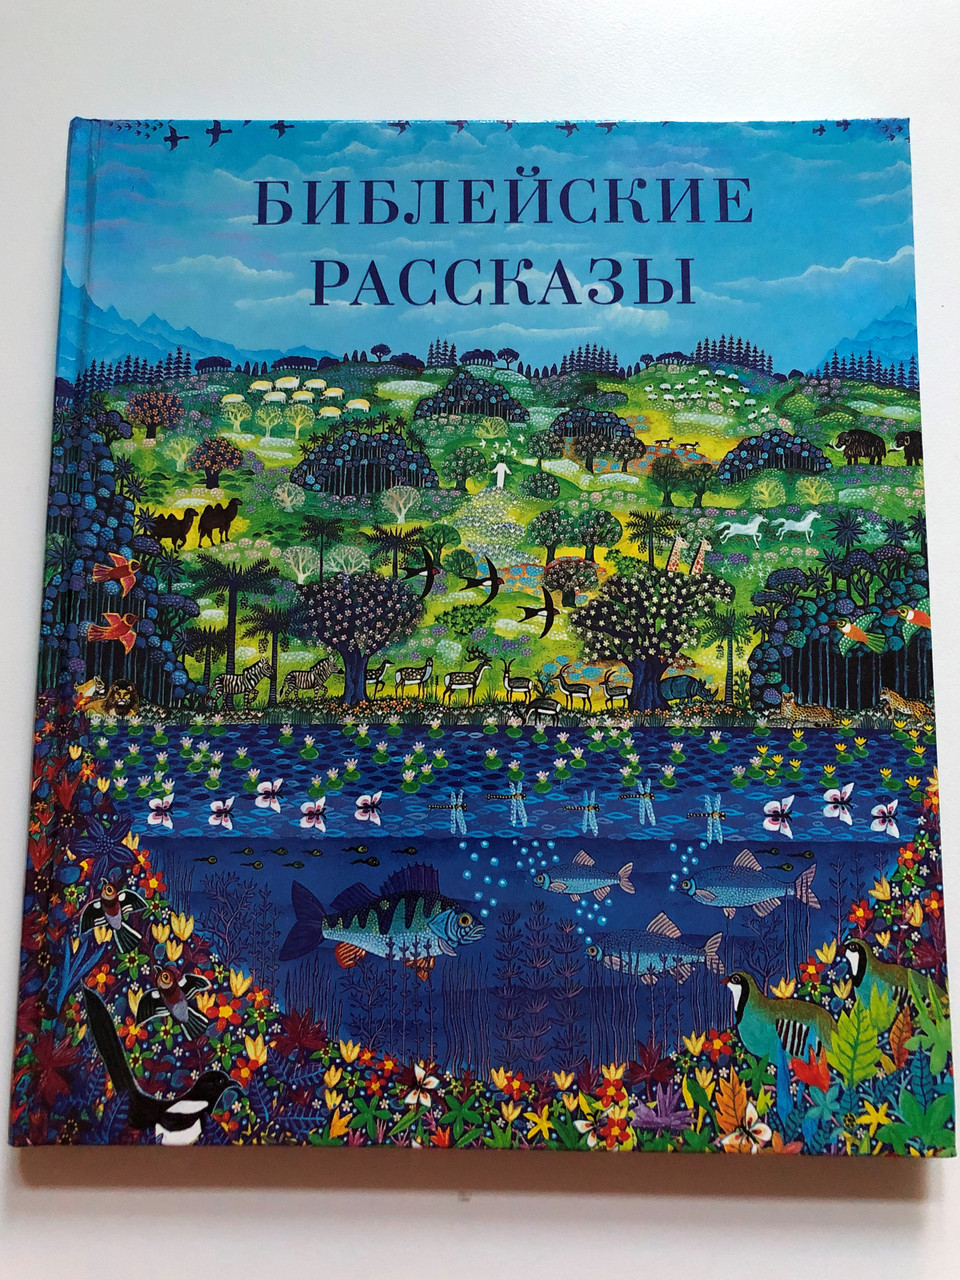 https://cdn10.bigcommerce.com/s-62bdpkt7pb/products/51168/images/260503/Bible_stories_in_Russian_by_Klaus_Knoke_1__10224.1670698540.1280.1280.JPG?c=2